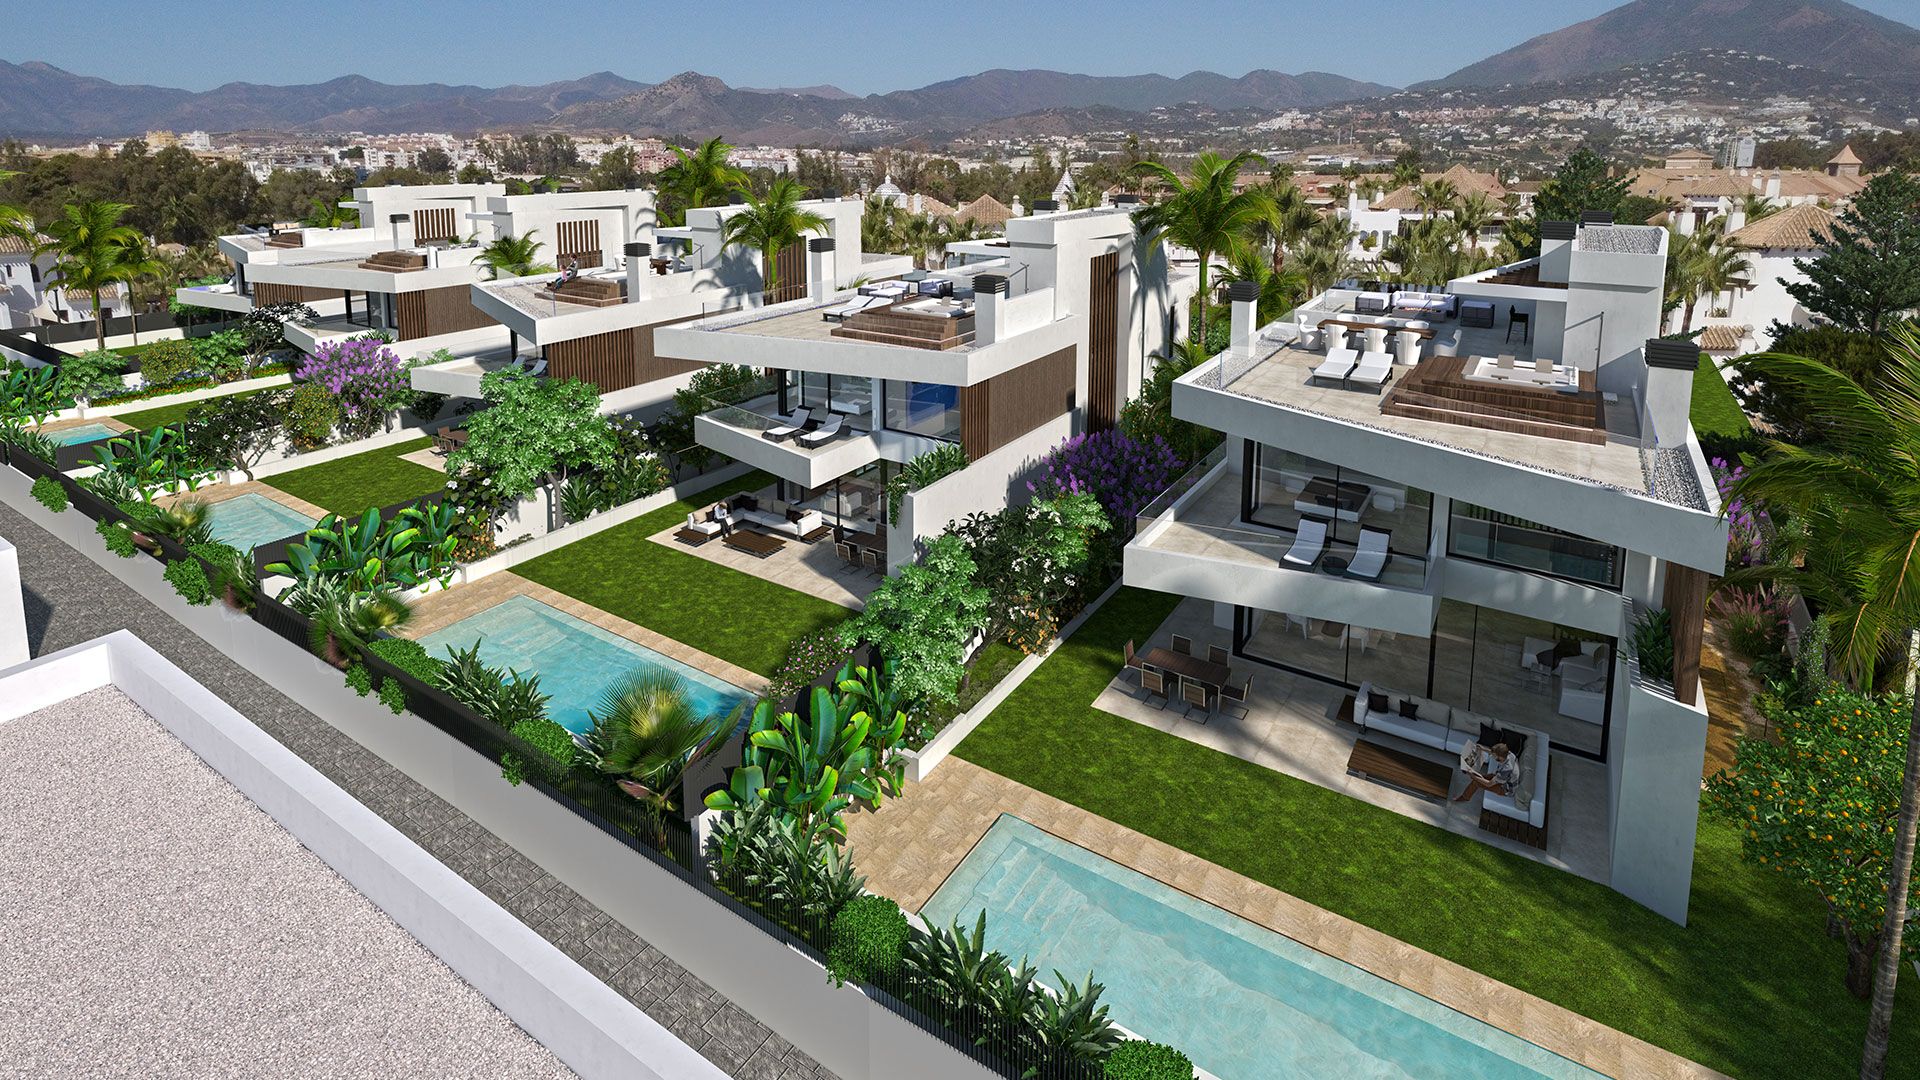 Introducing a Limited Collection: 5 Exquisite Villas in the Heart of Puerto Banús | Engel & Völkers Marbella